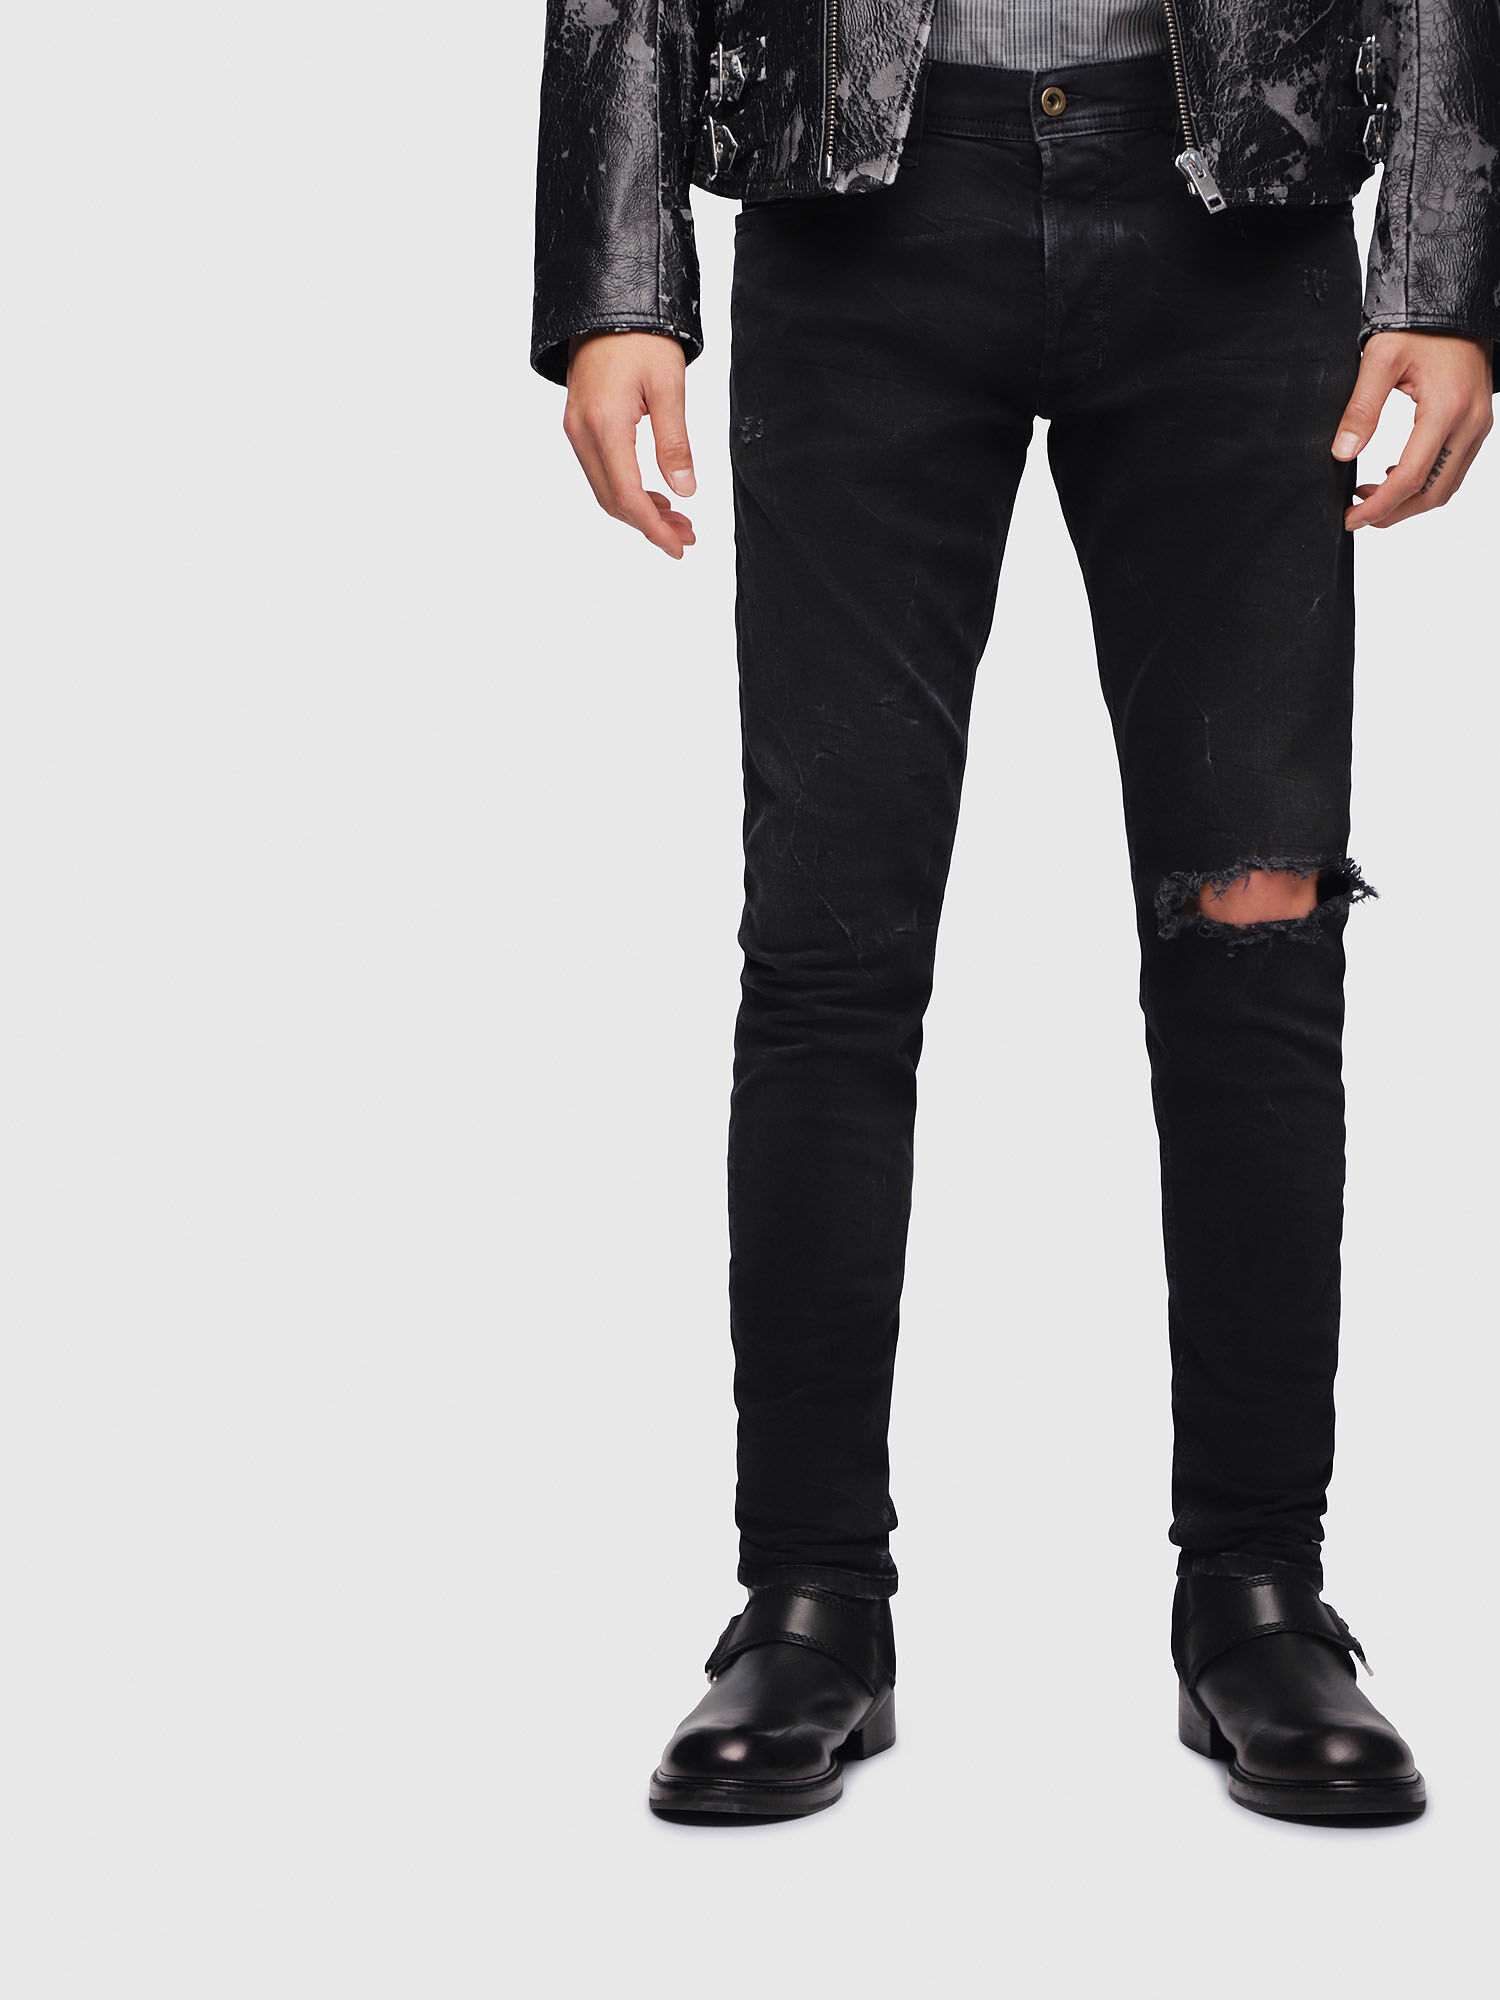 levi's 701 highrise straight jeans